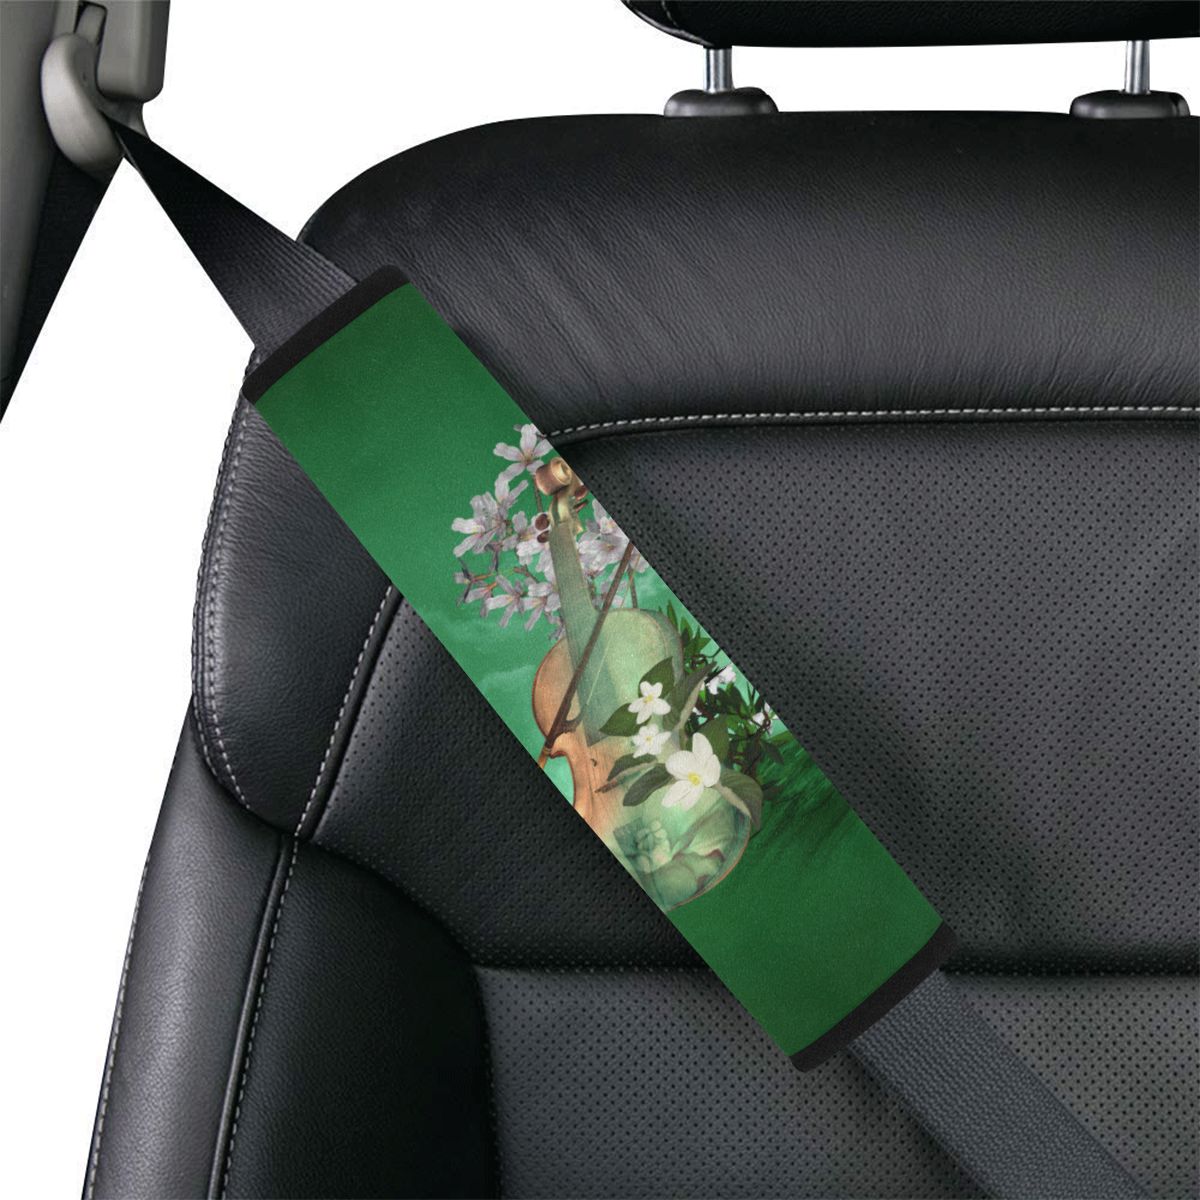 Violin with flowers Car Seat Belt Cover 7''x12.6''